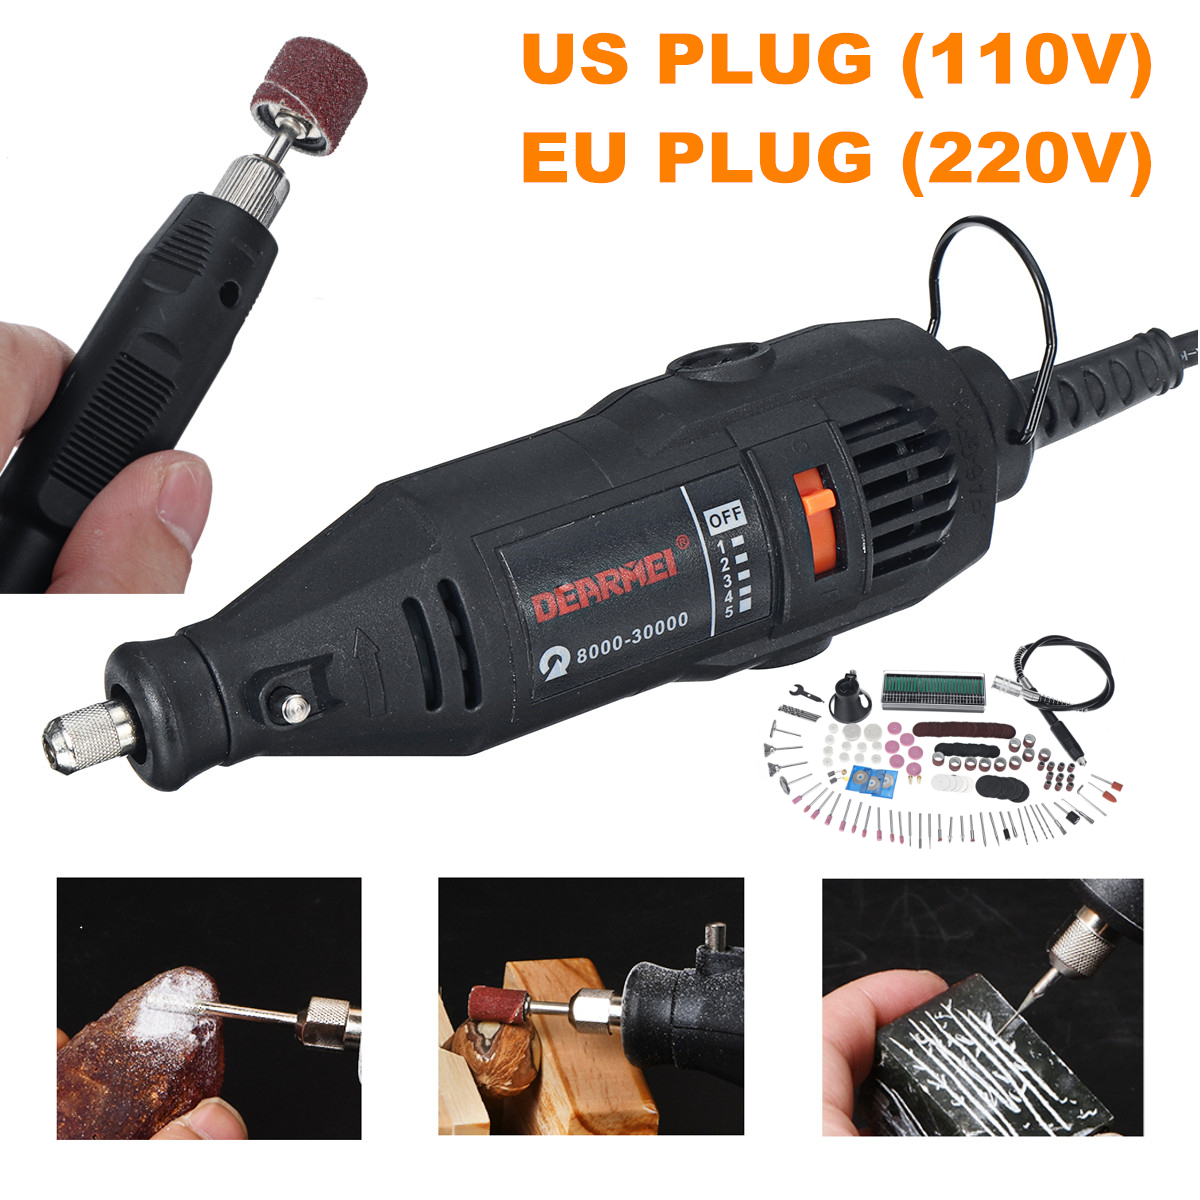 180PCS-Professional-Mini-Electric-Drill-Grinder-Kit-5-Speed-Rotary-Engraver-Tools-Set-For-Engraving--1579978-1